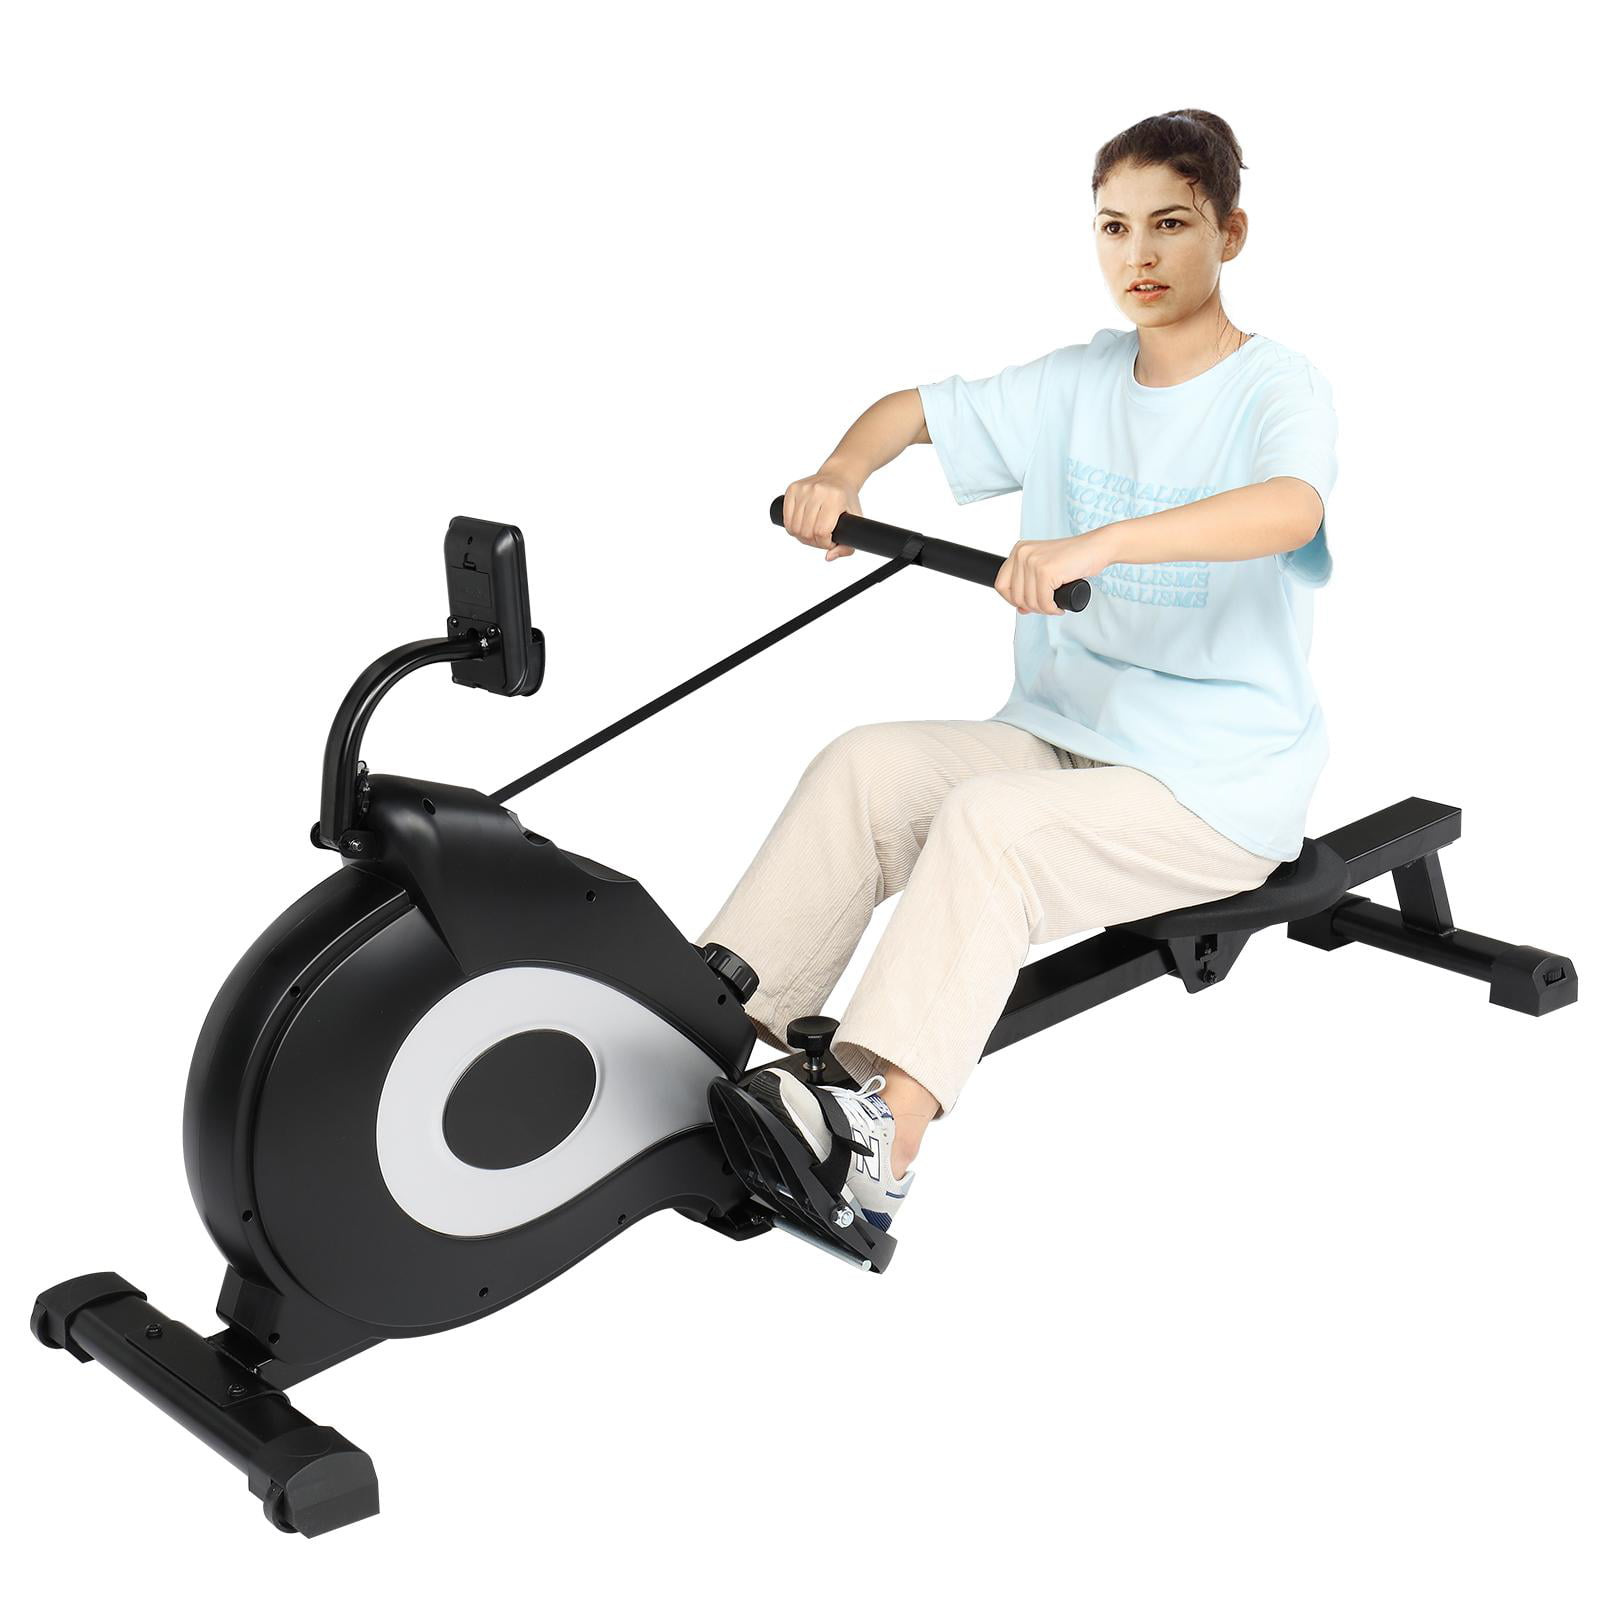 Included an Dust Cover and Phone Holder Wood Rower with Bluetooth Monitor,Indoor Cardio Training with Whole Body Exercise GYM ENERGY Foldable Water Rowing Machine for Home Gym Fitness 